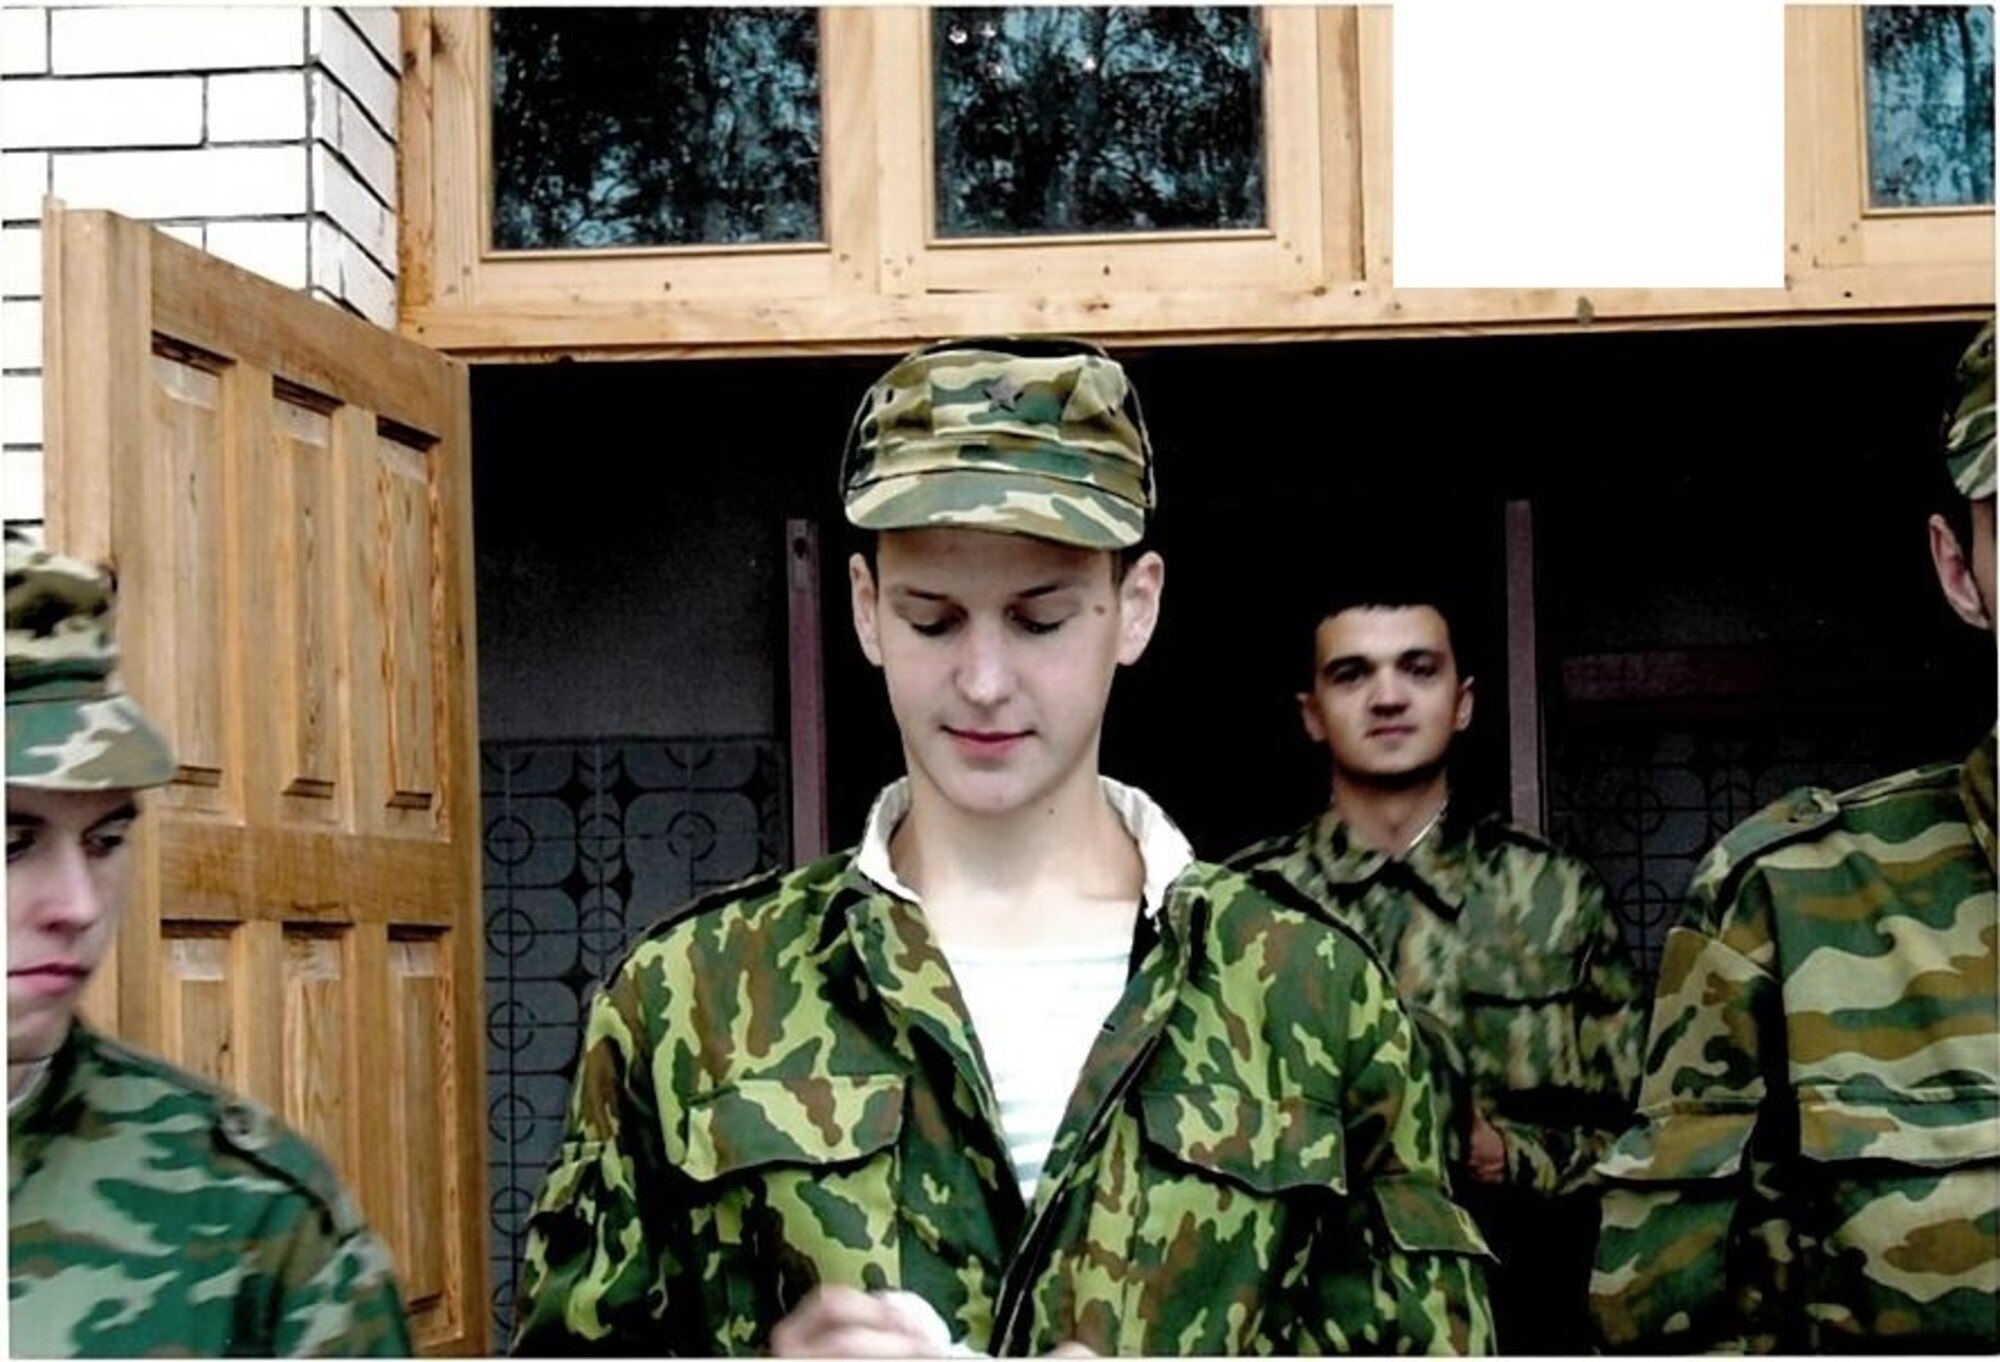 Aliaksei Krasouski, center, stands with fellow Belarussian airmen in August 2004 during his time in the Belarussian Air Force. Before coming to the U.S. and becoming a medical technician in the U.S. Air Force, Krasouski lived in Minsk, Belarus and served in the Belarussian Air Force. (Courtesy Photo) 